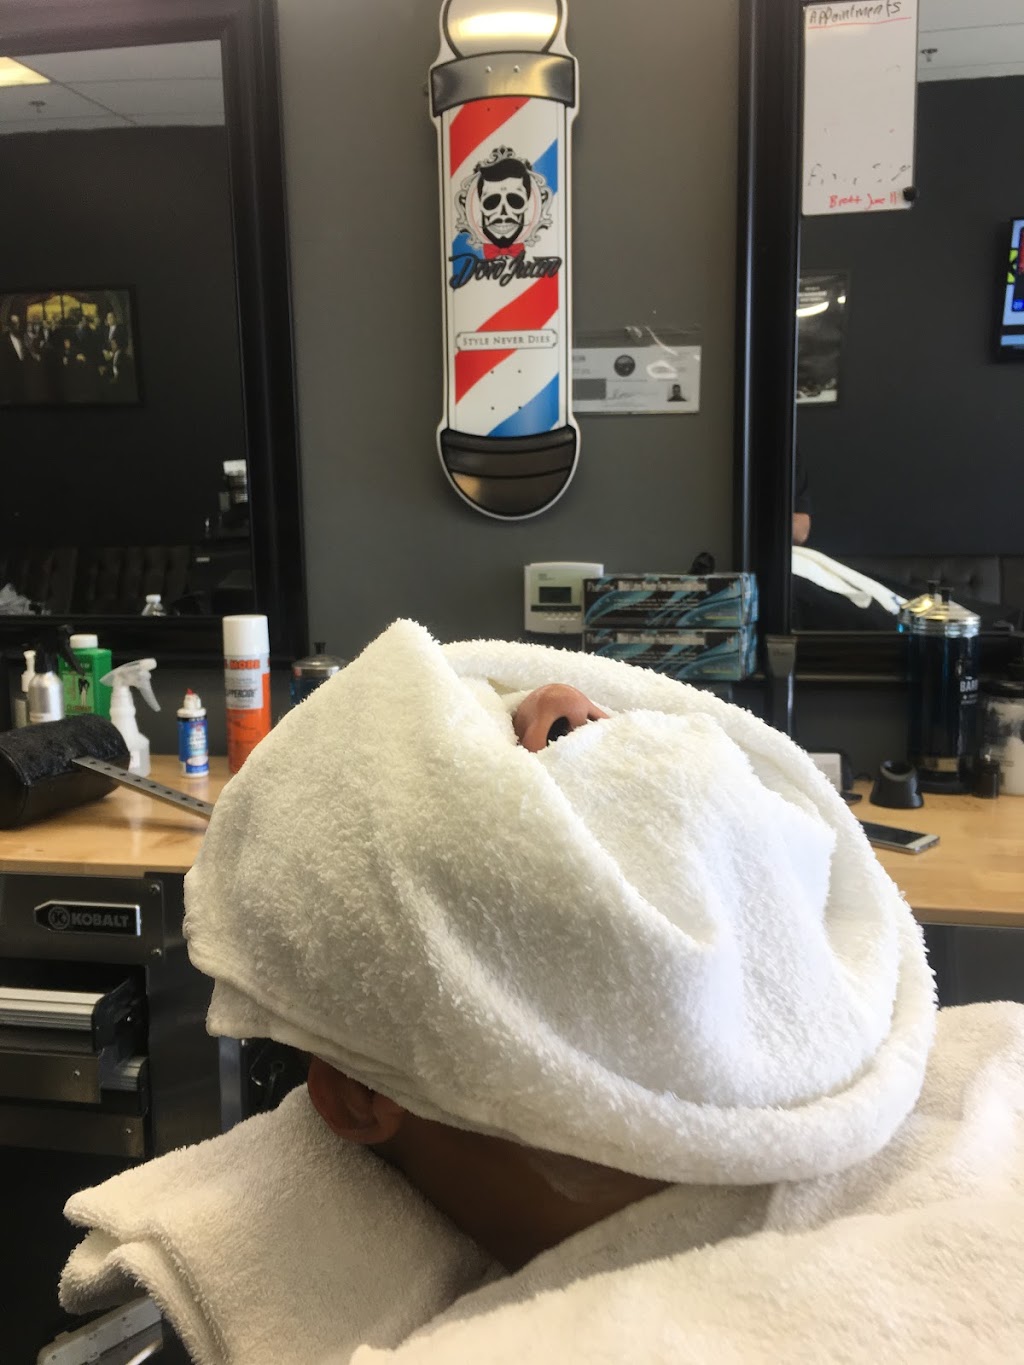 Clippers barbershop | 141 N Twin Oaks Valley Rd UNIT 126, San Marcos, CA 92069, USA | Phone: (442) 515-3431